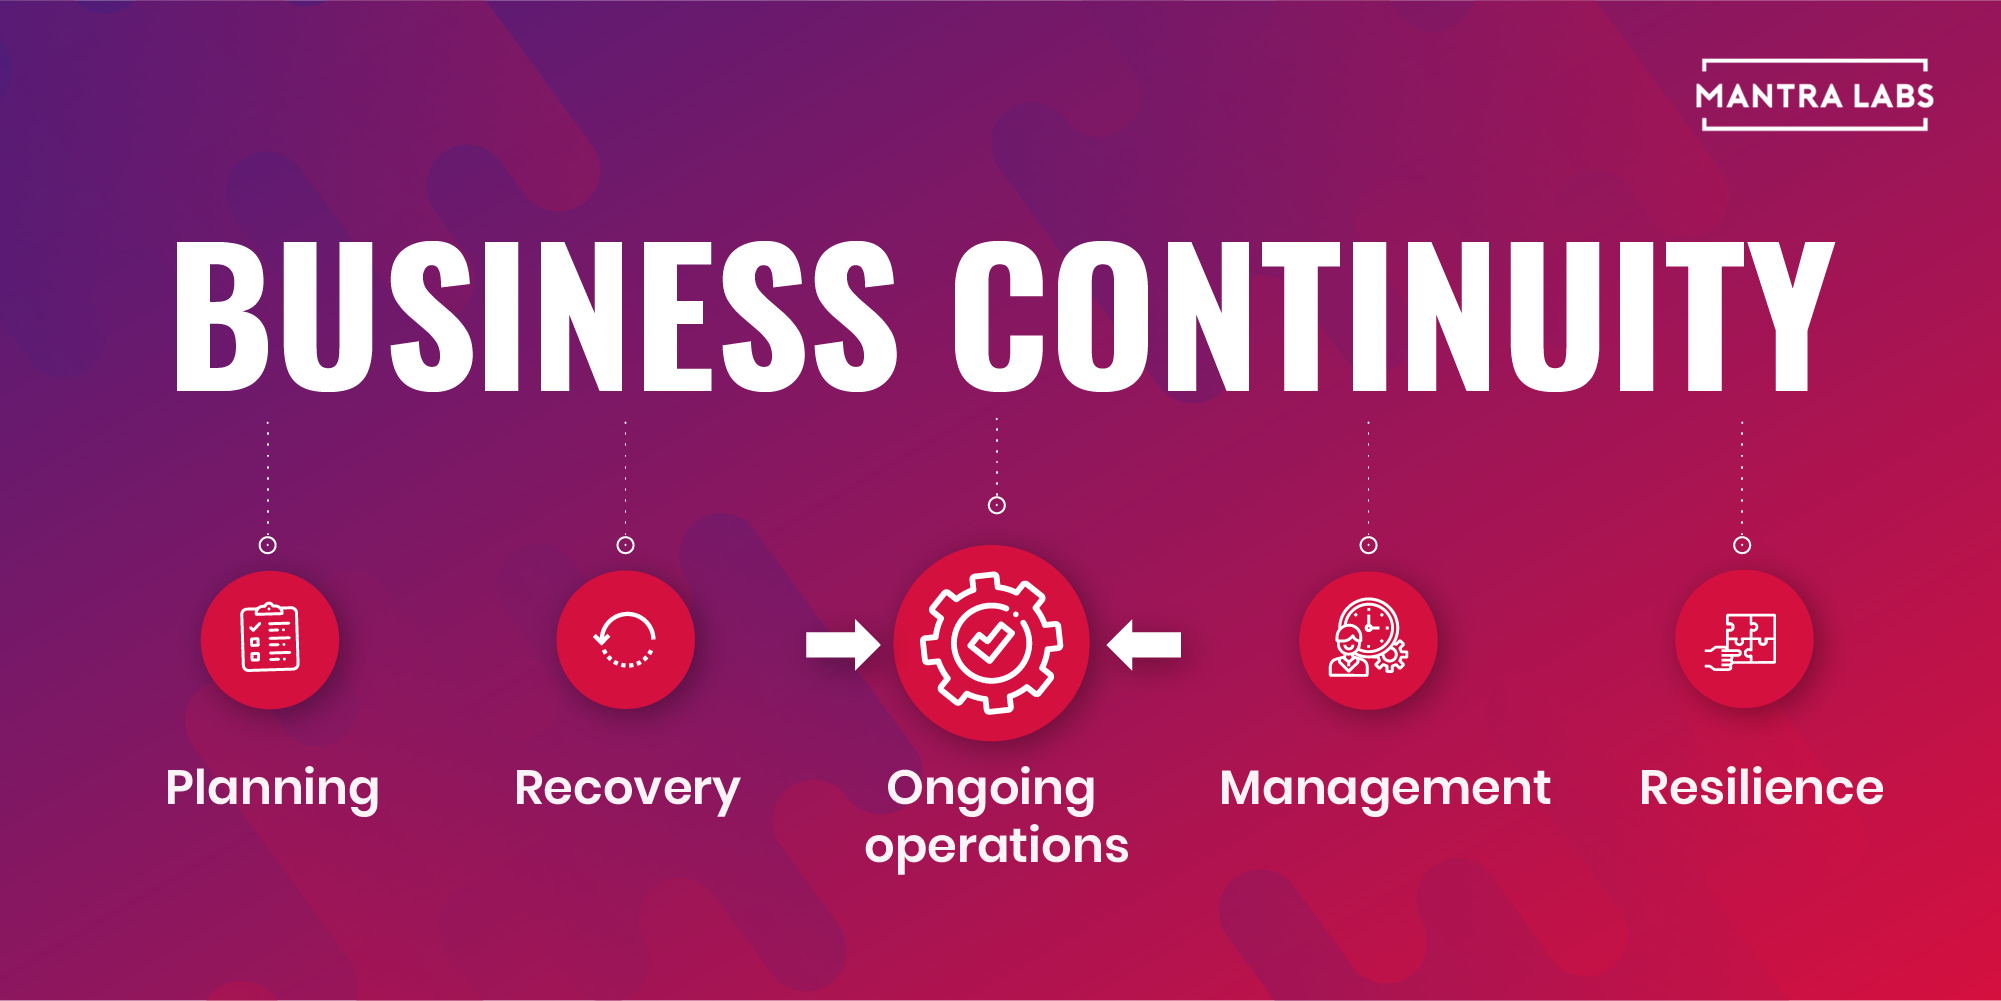 business continuity case study examples